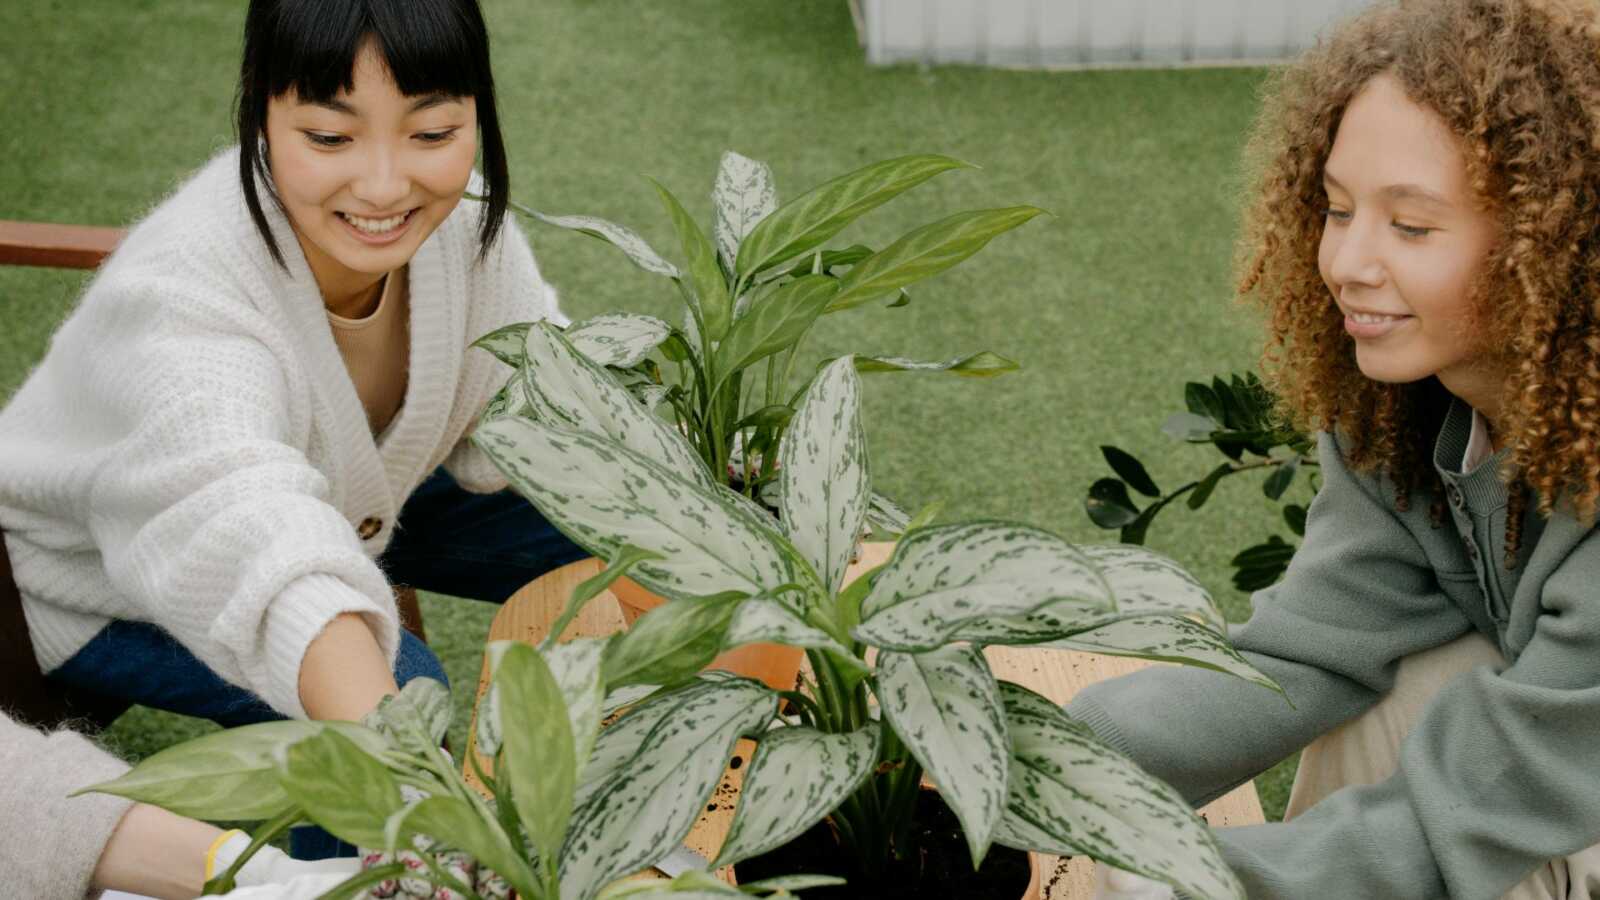 two women planting outside together